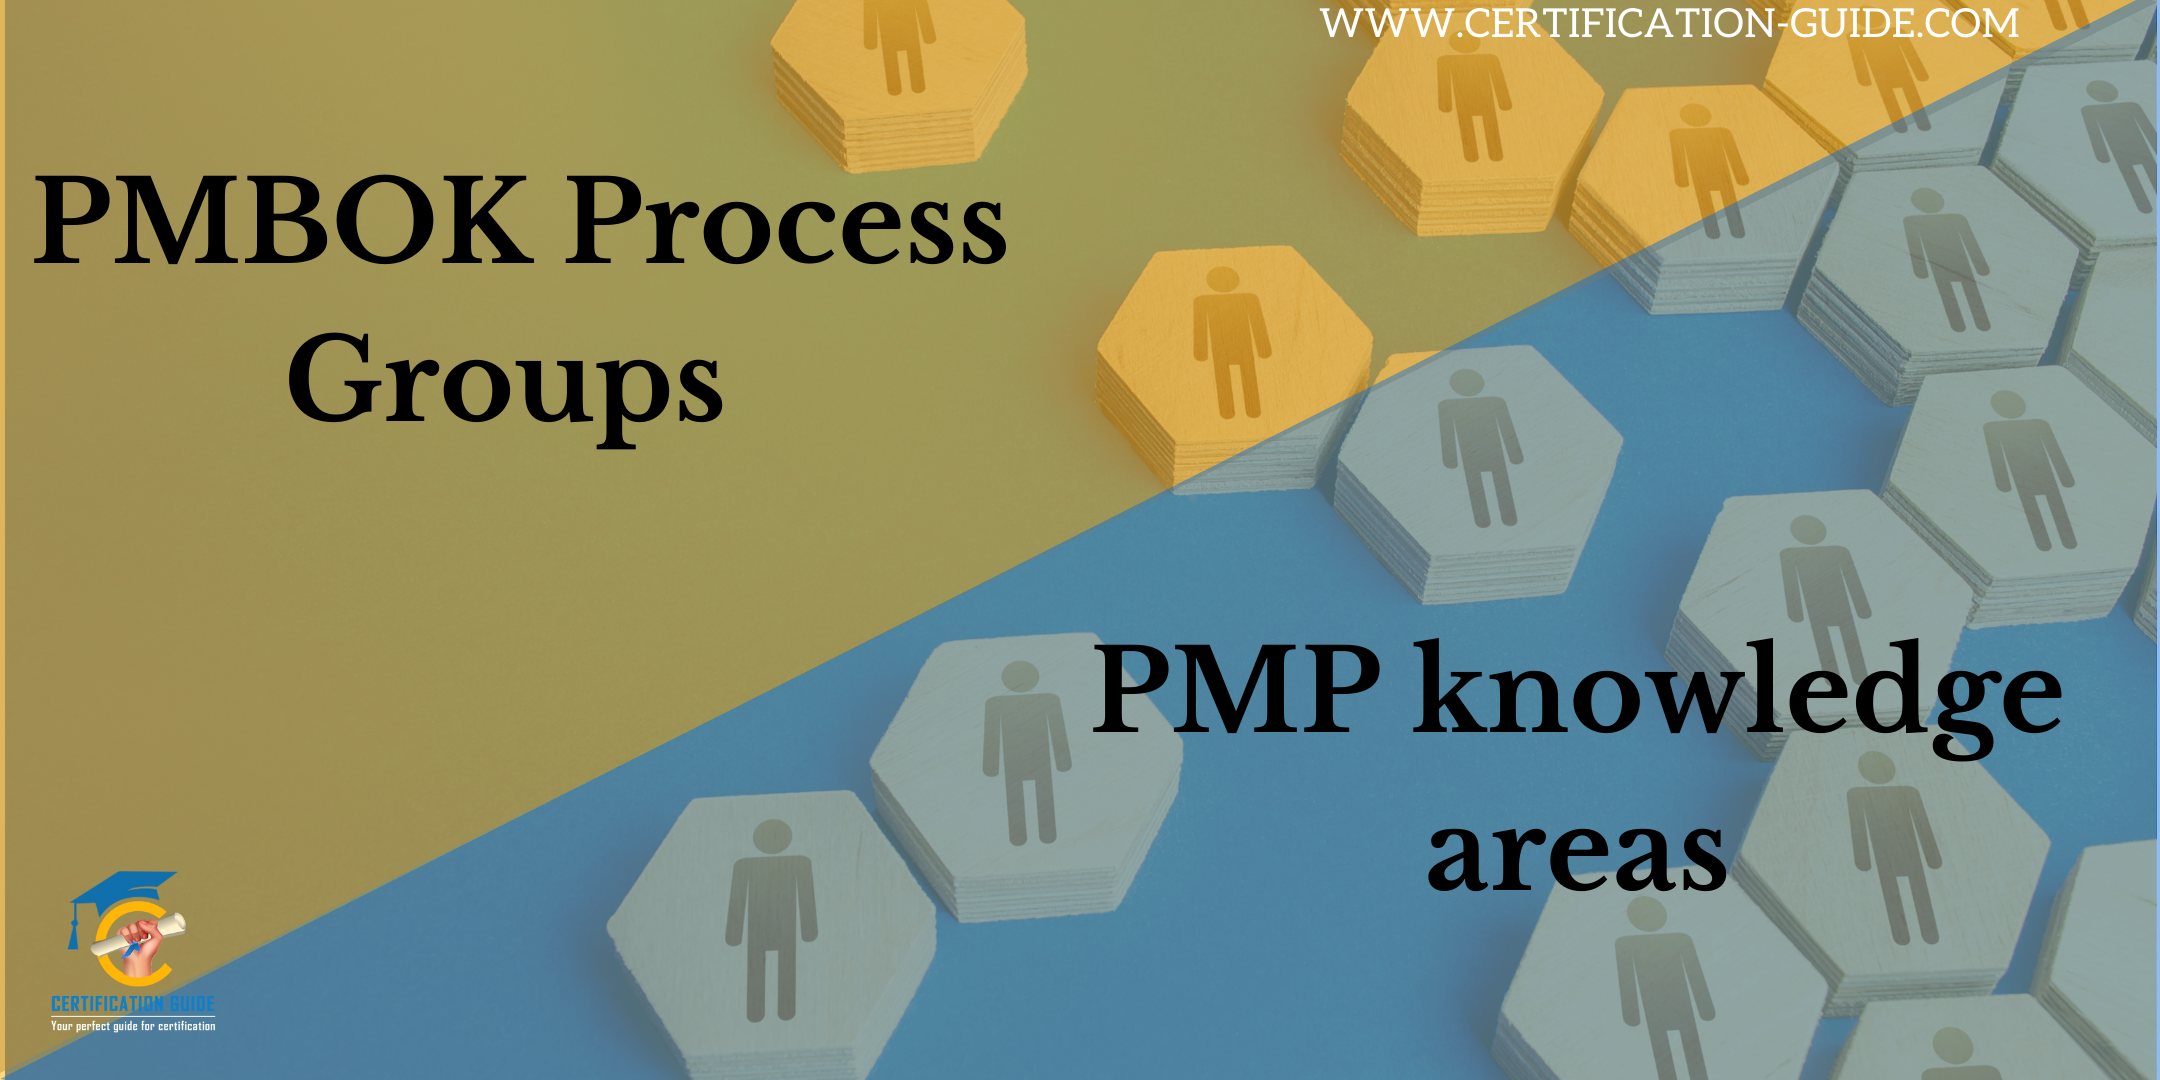 PMBOK Guide and PMP Process Groups